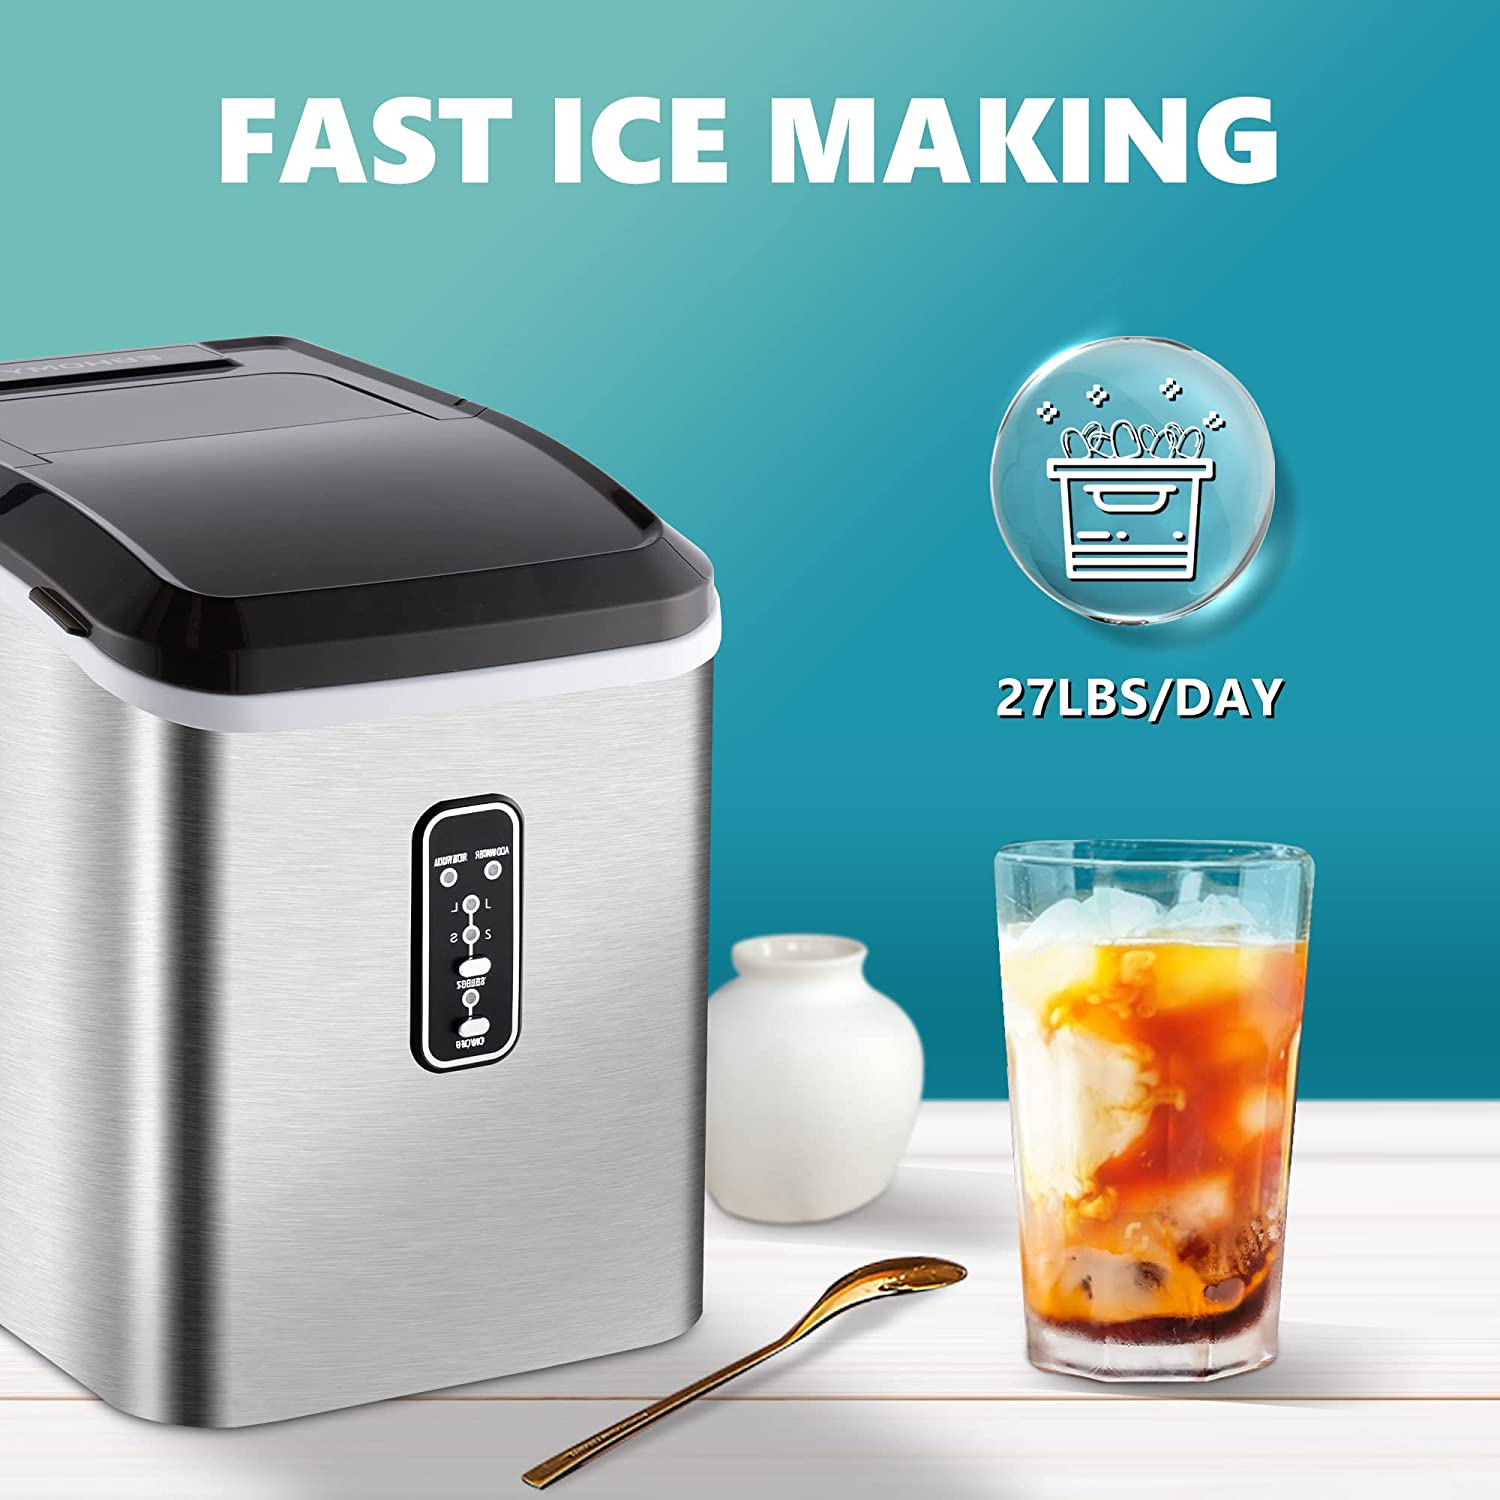 Euhomy Ice Maker Machine Countertop, 26 lbs in 24 Hours, 9 Cubes Ready in 6 Mins, Self-Clean Electric Ice Maker Compact Potable Ice Maker with Ice